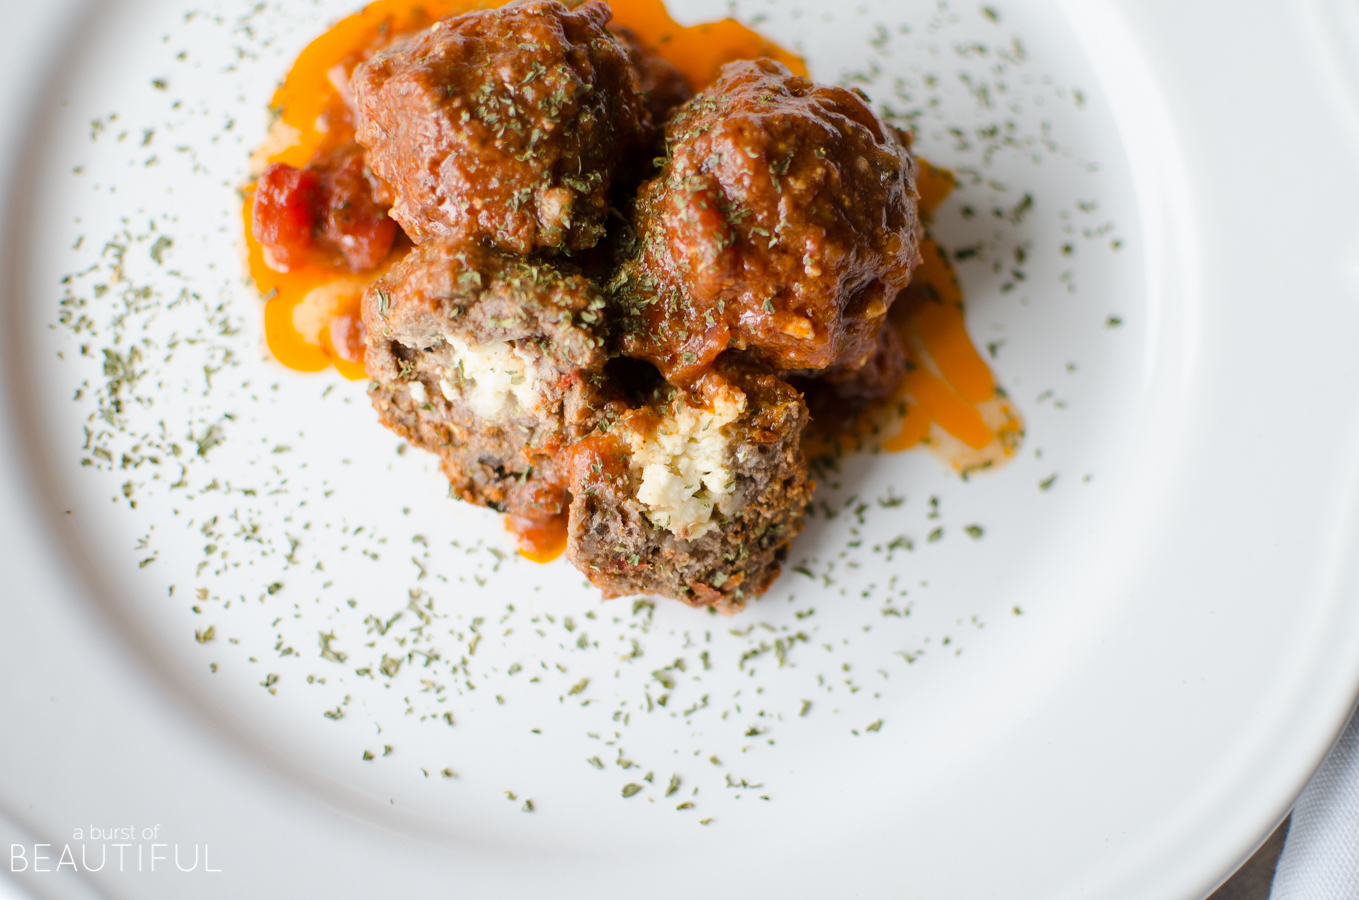 Perfect as an appetizer or served as part of a meal, our Slow Cooker Stuffed Mediterranean Meatballs are stuffed with feta cheese, sundried tomatoes and black olives to create a mouthwatering flavour combination | A Burst of Beautiful 